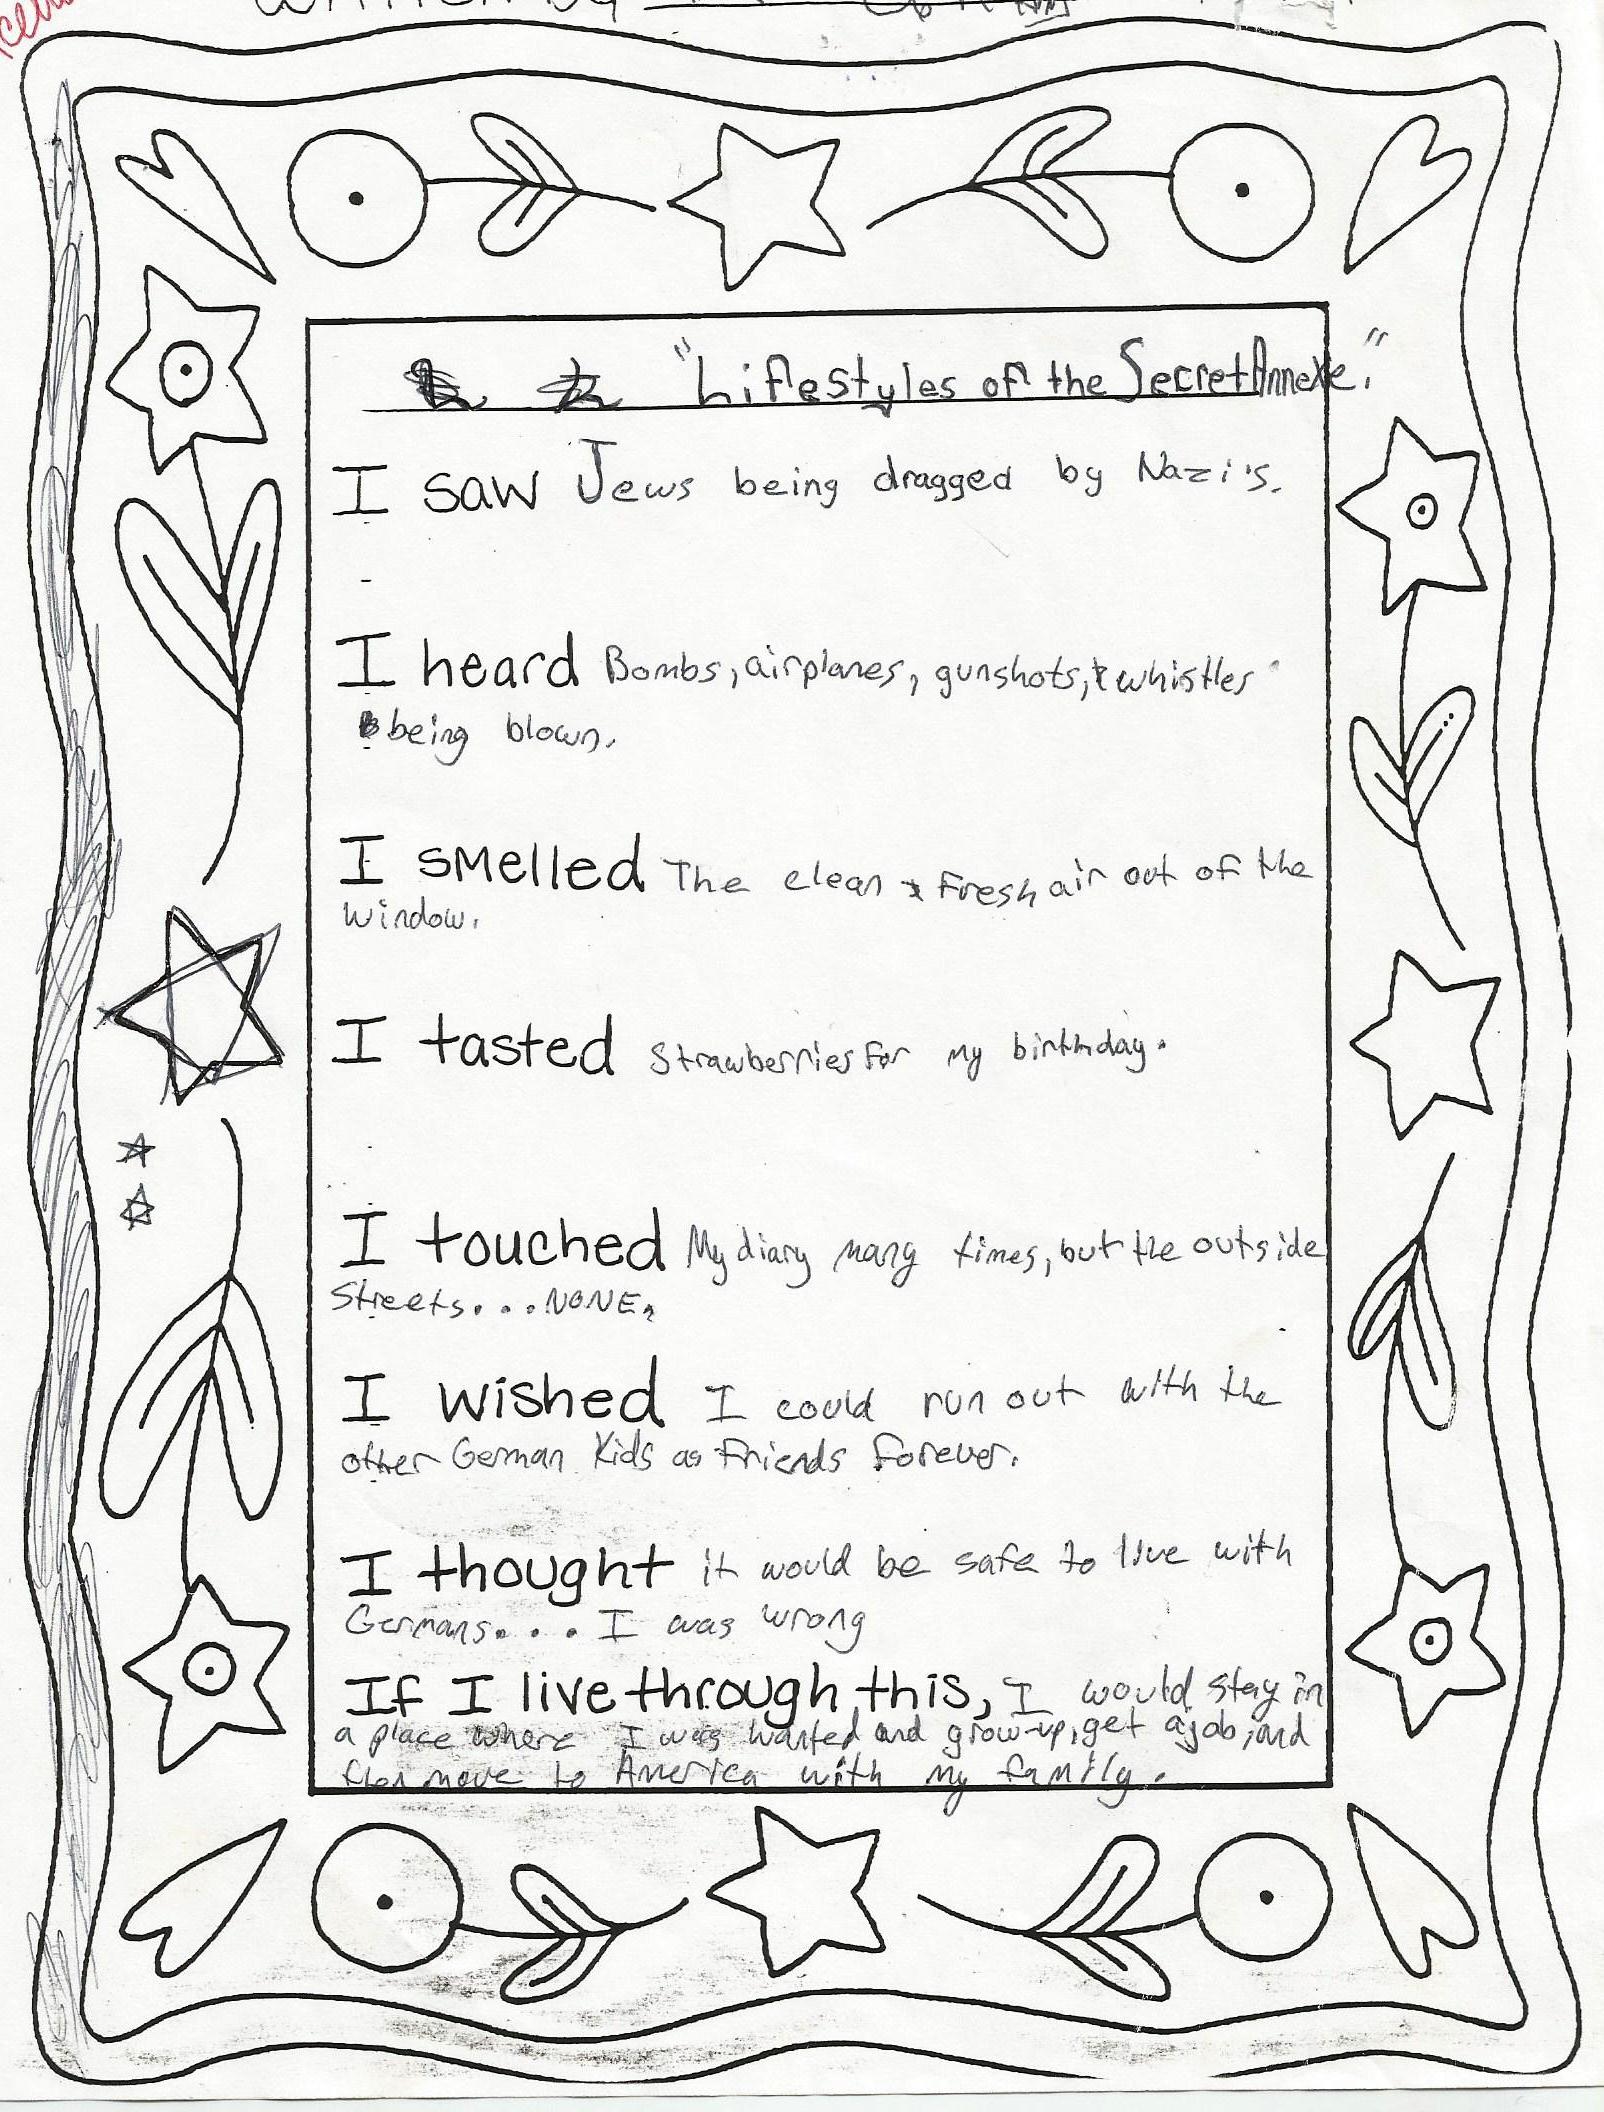 Anne Frank poem written from her point of view Student Sample #4 